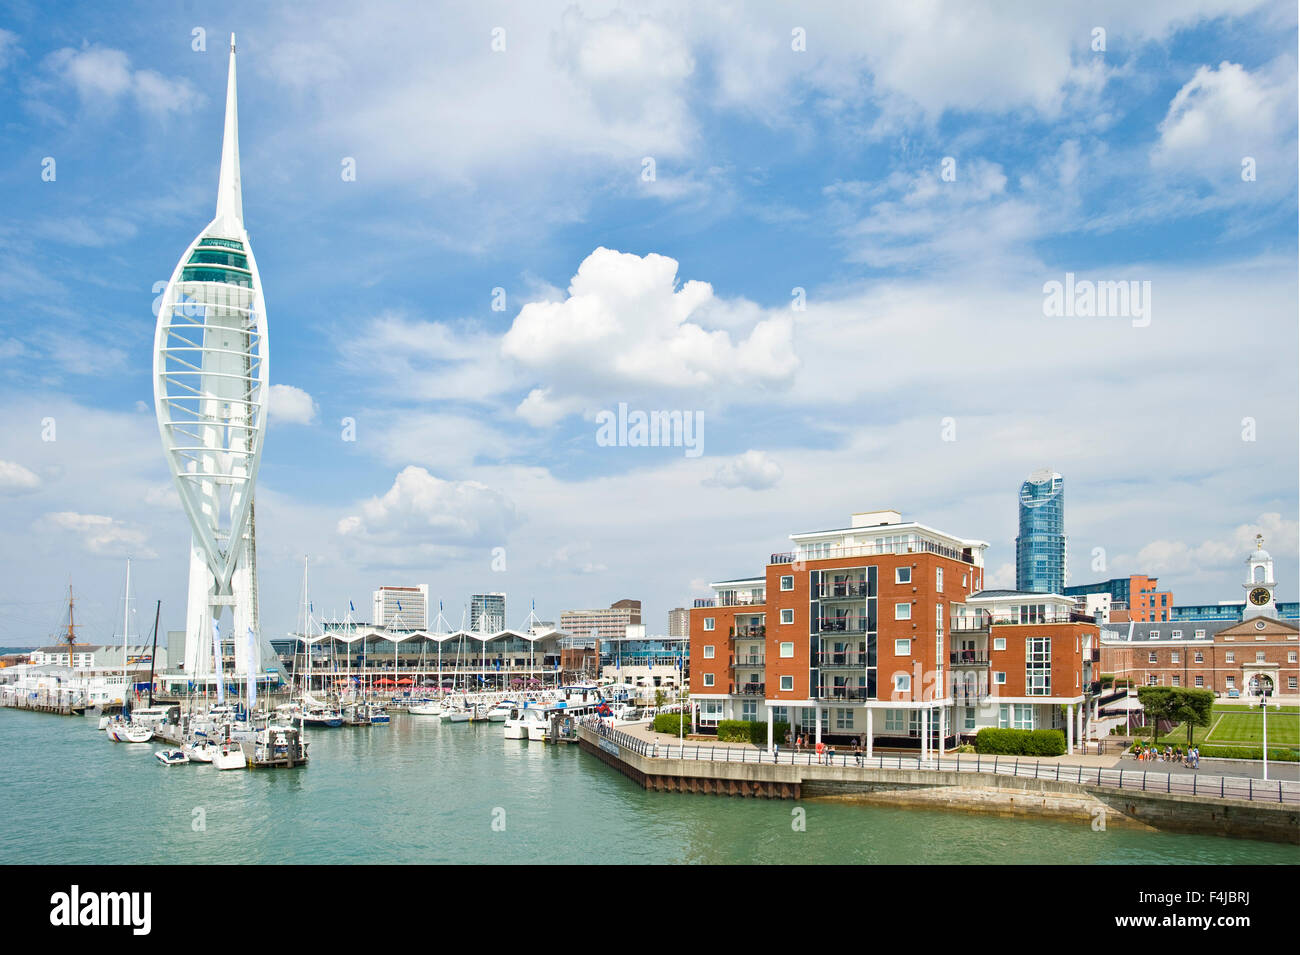 The Emirates Spinnaker Tower - the centrepiece of the redevelopment of Portsmouth Harbour. Stock Photo